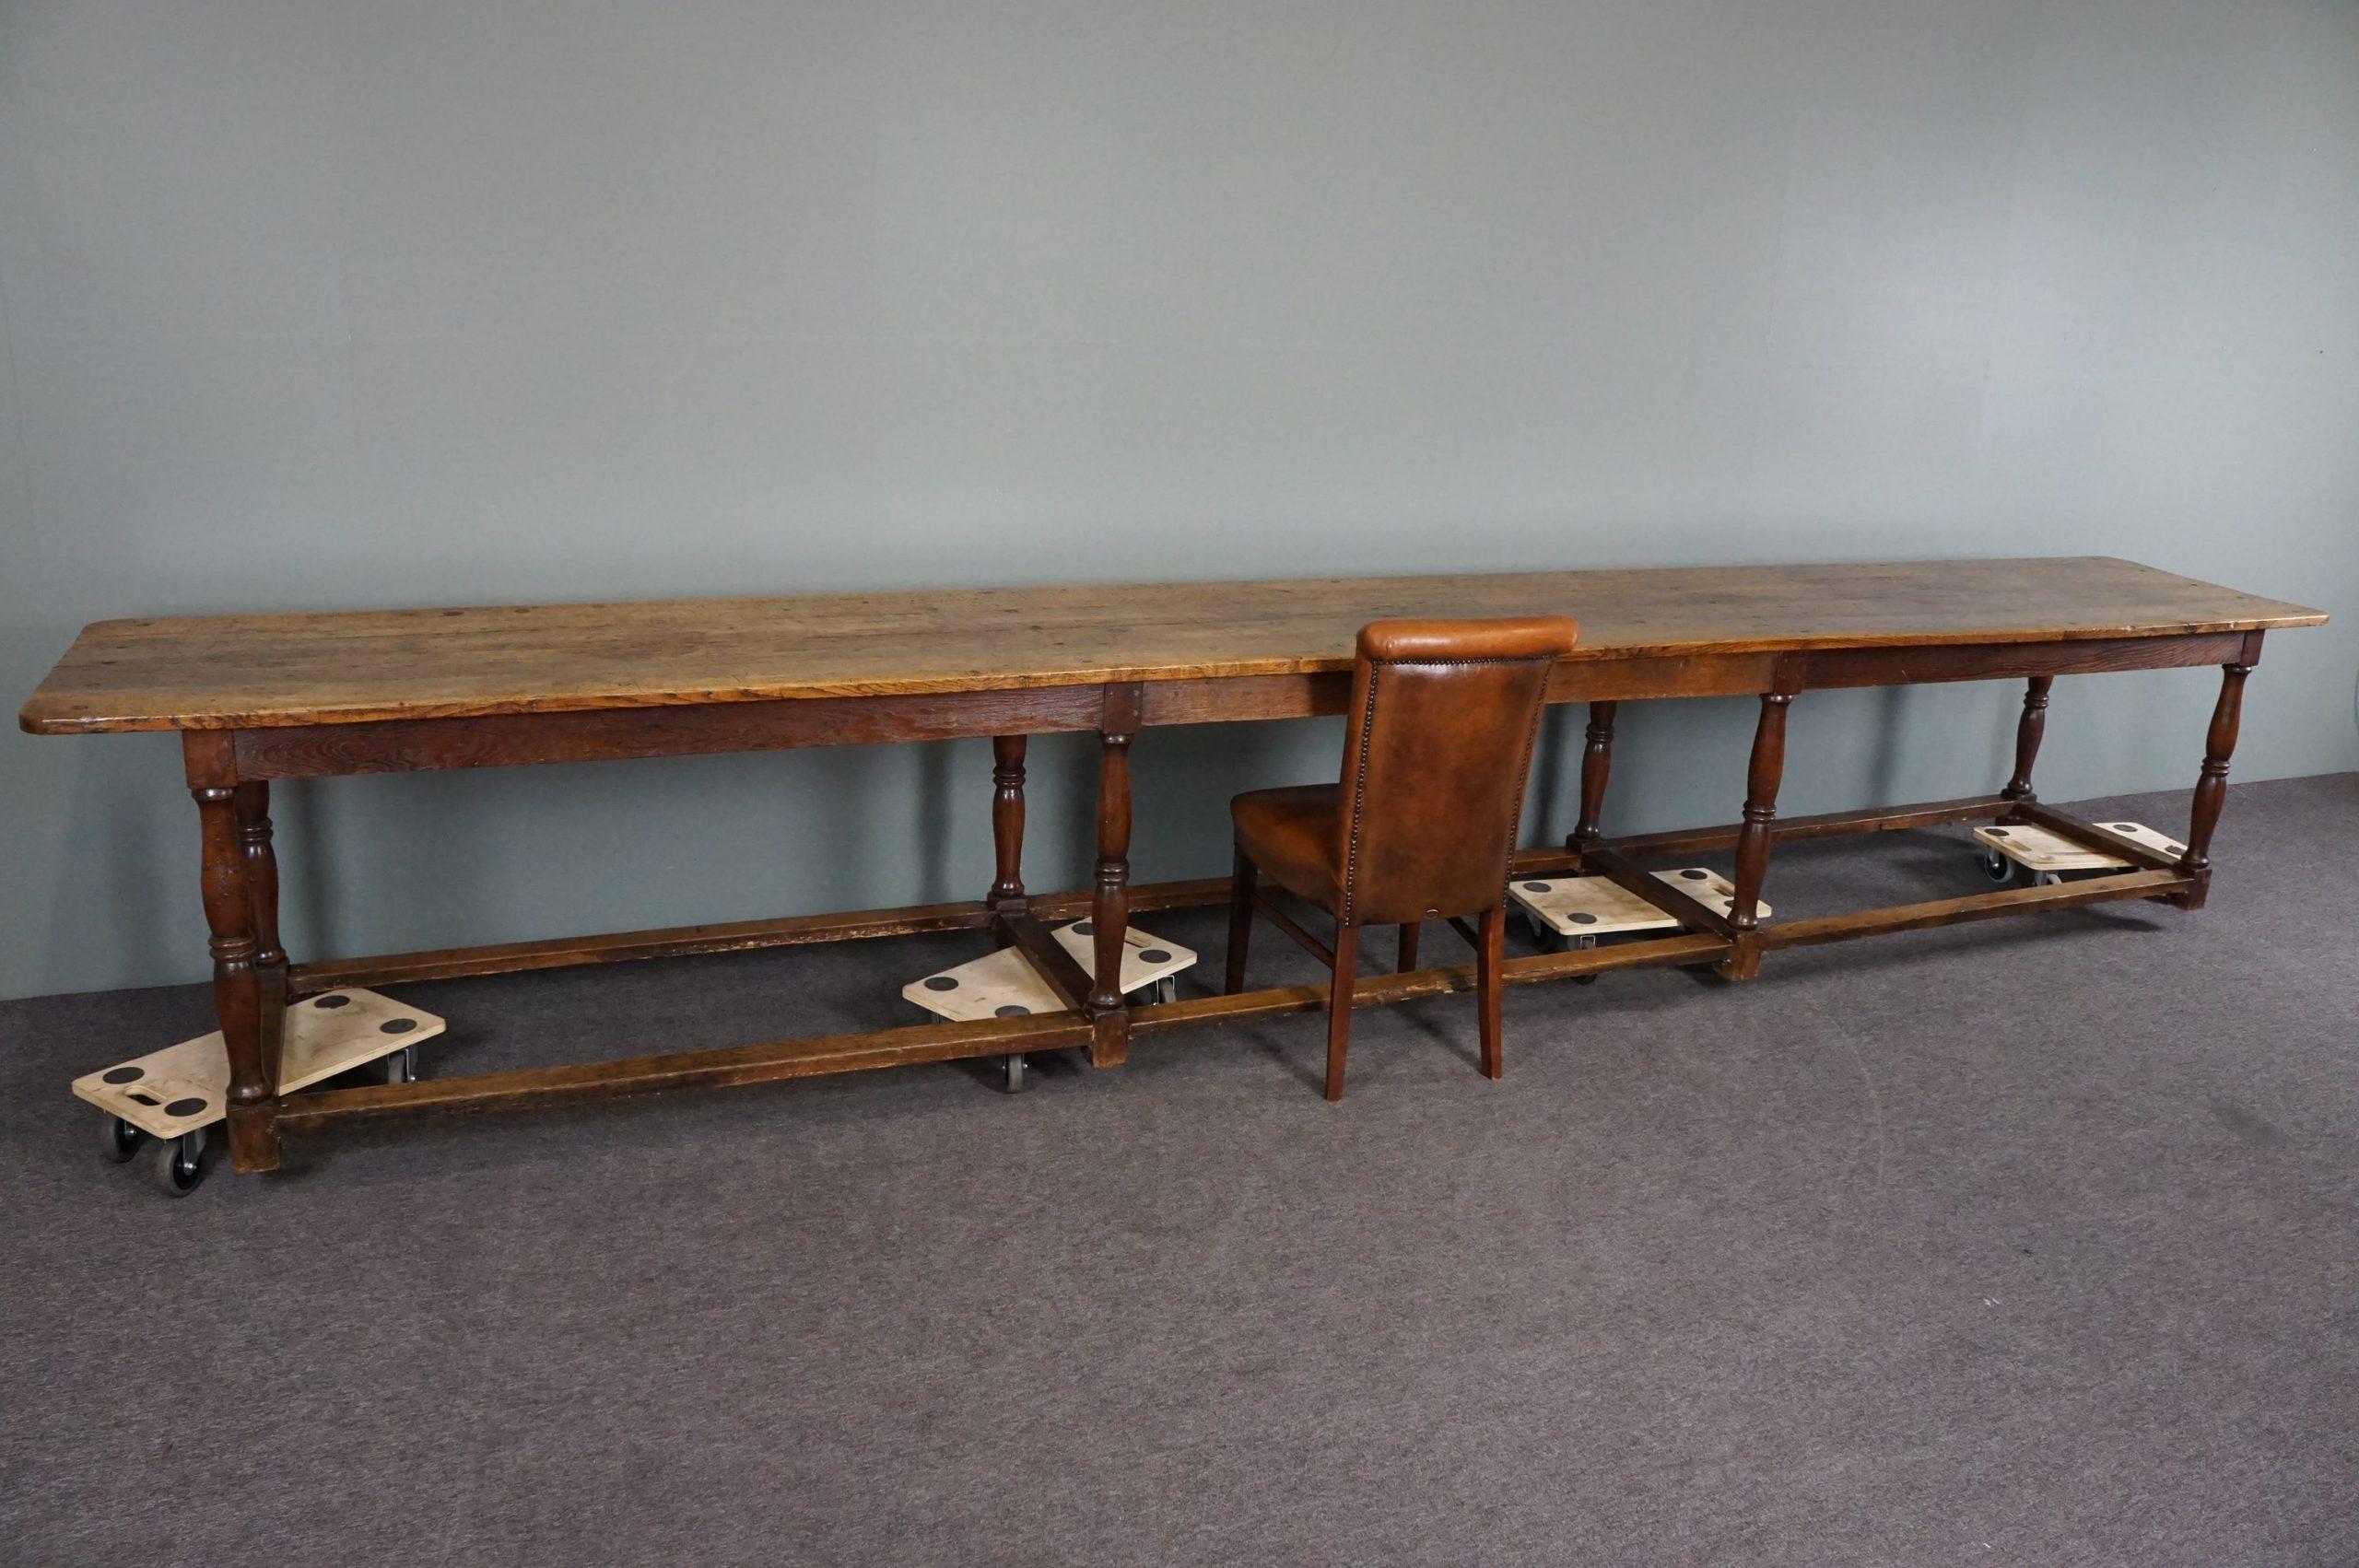 Hand-Crafted Very long antique 19th century English oak diningtable, 5 meter, Refectory table For Sale